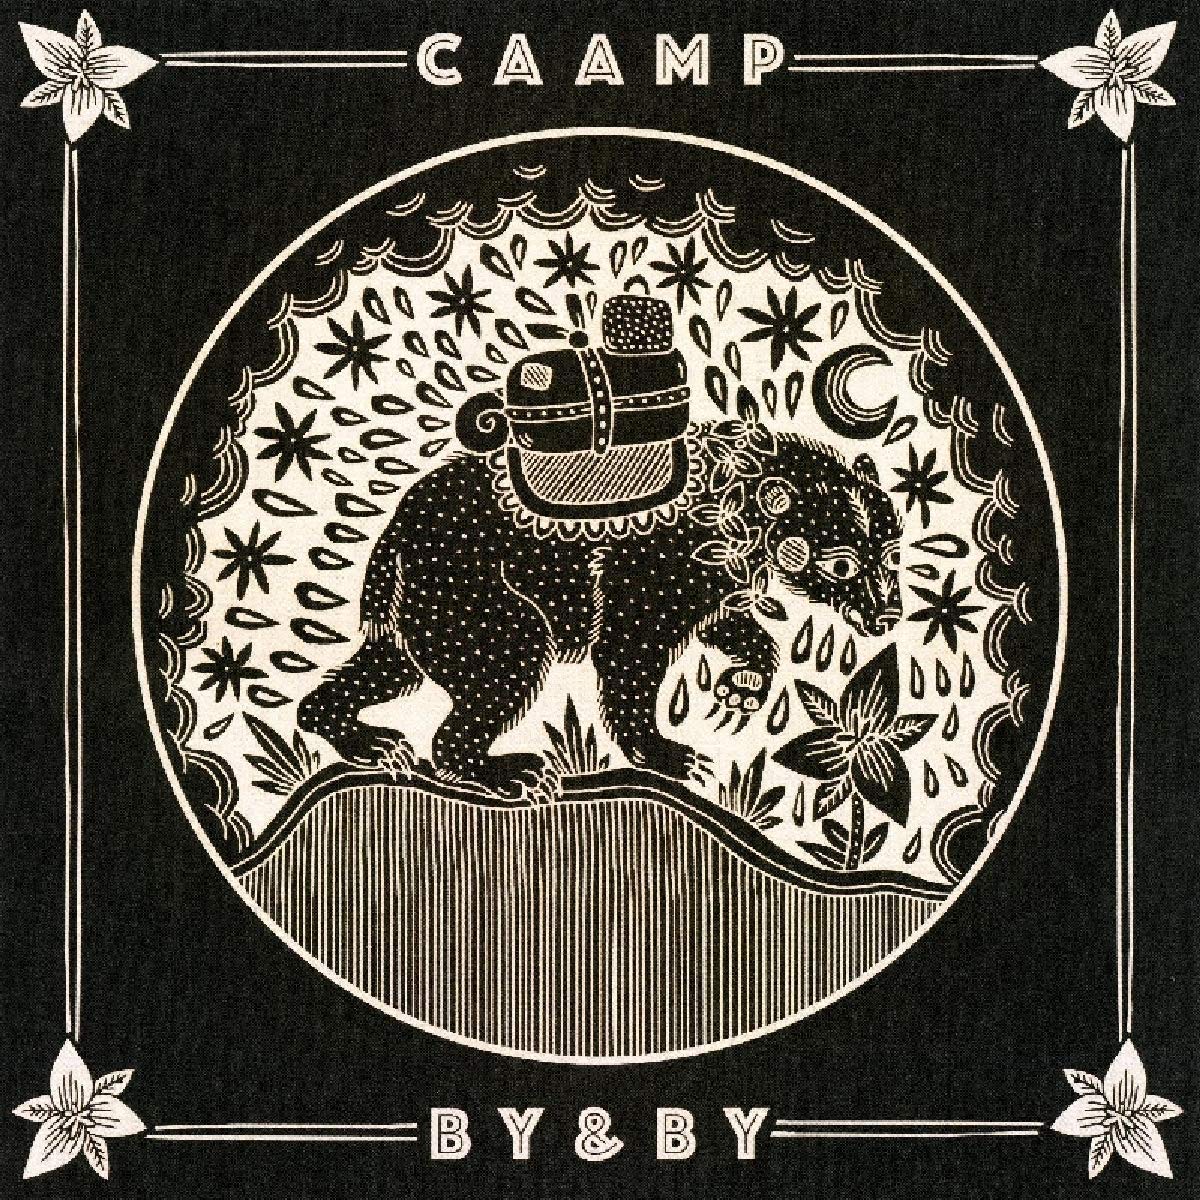 2LP - Caamp - By And By